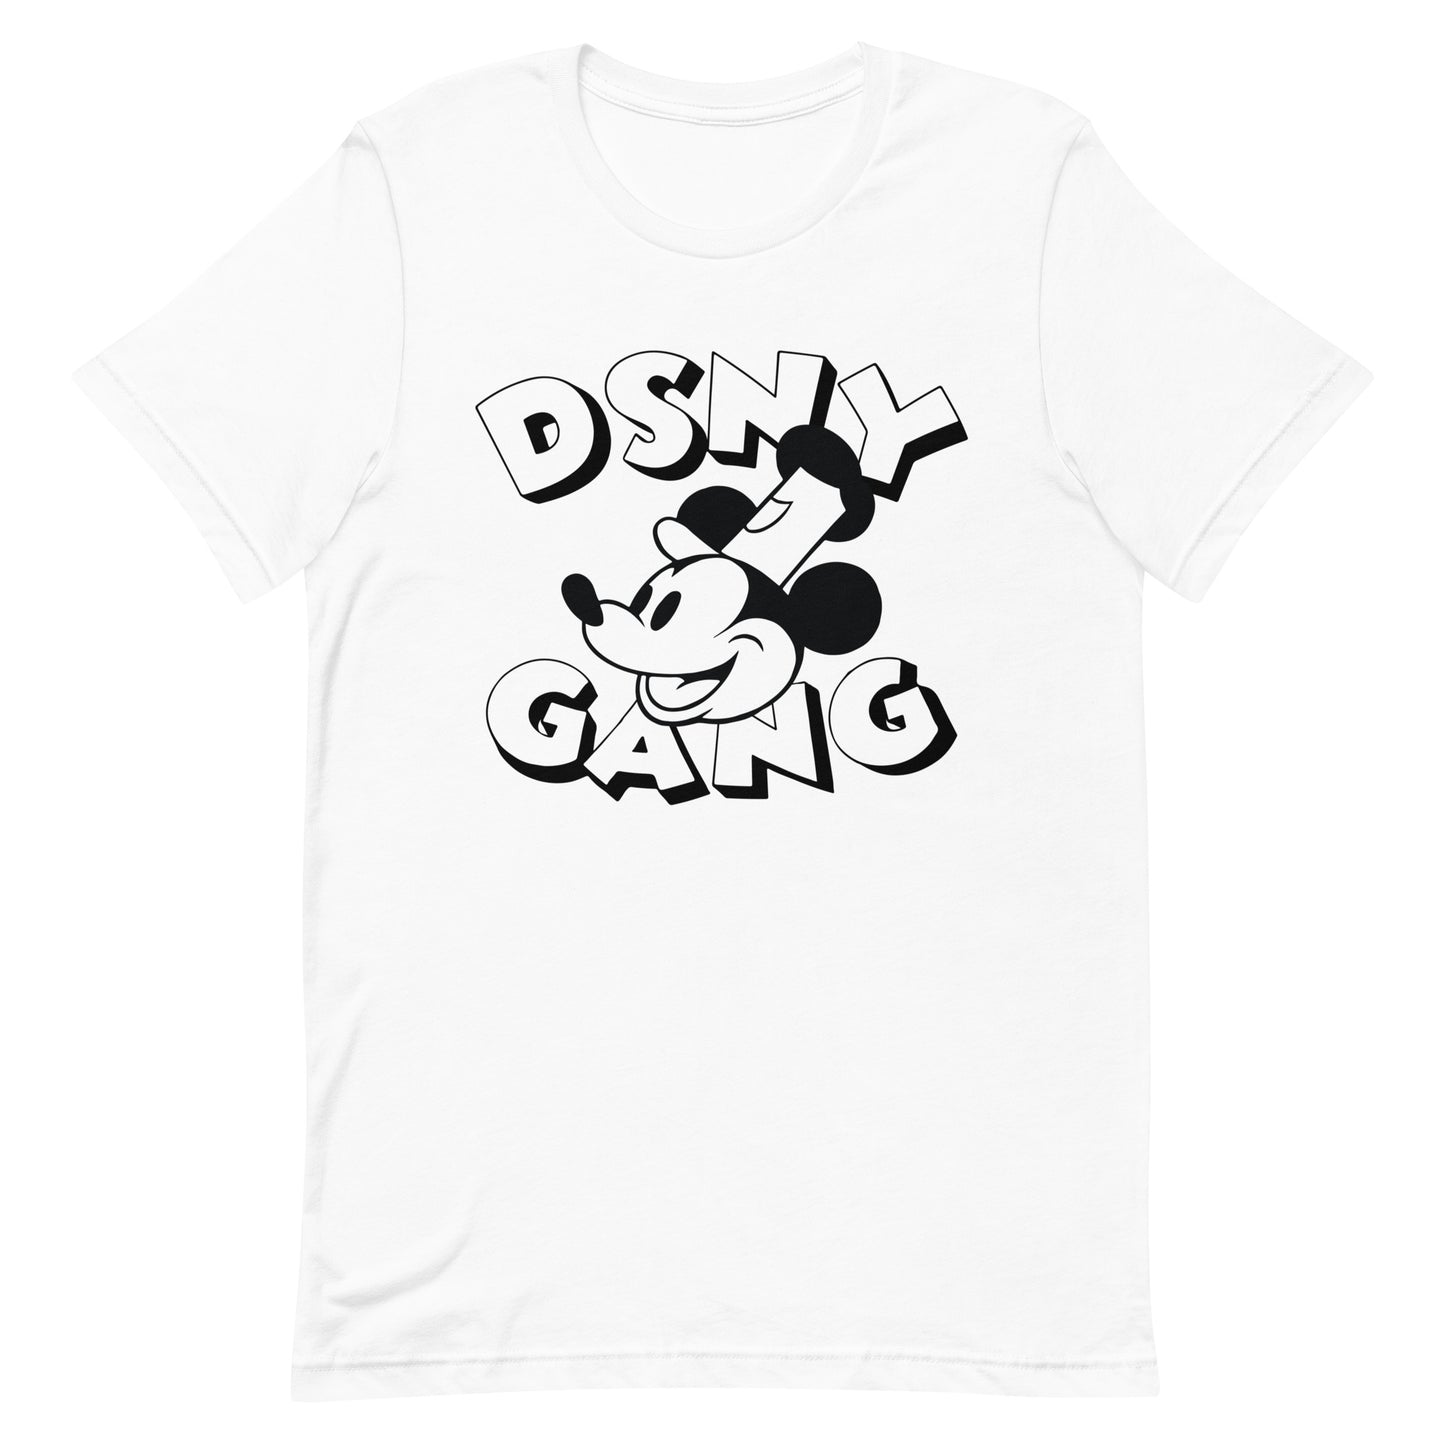 DSNY GANG Steamboat Willie Tee